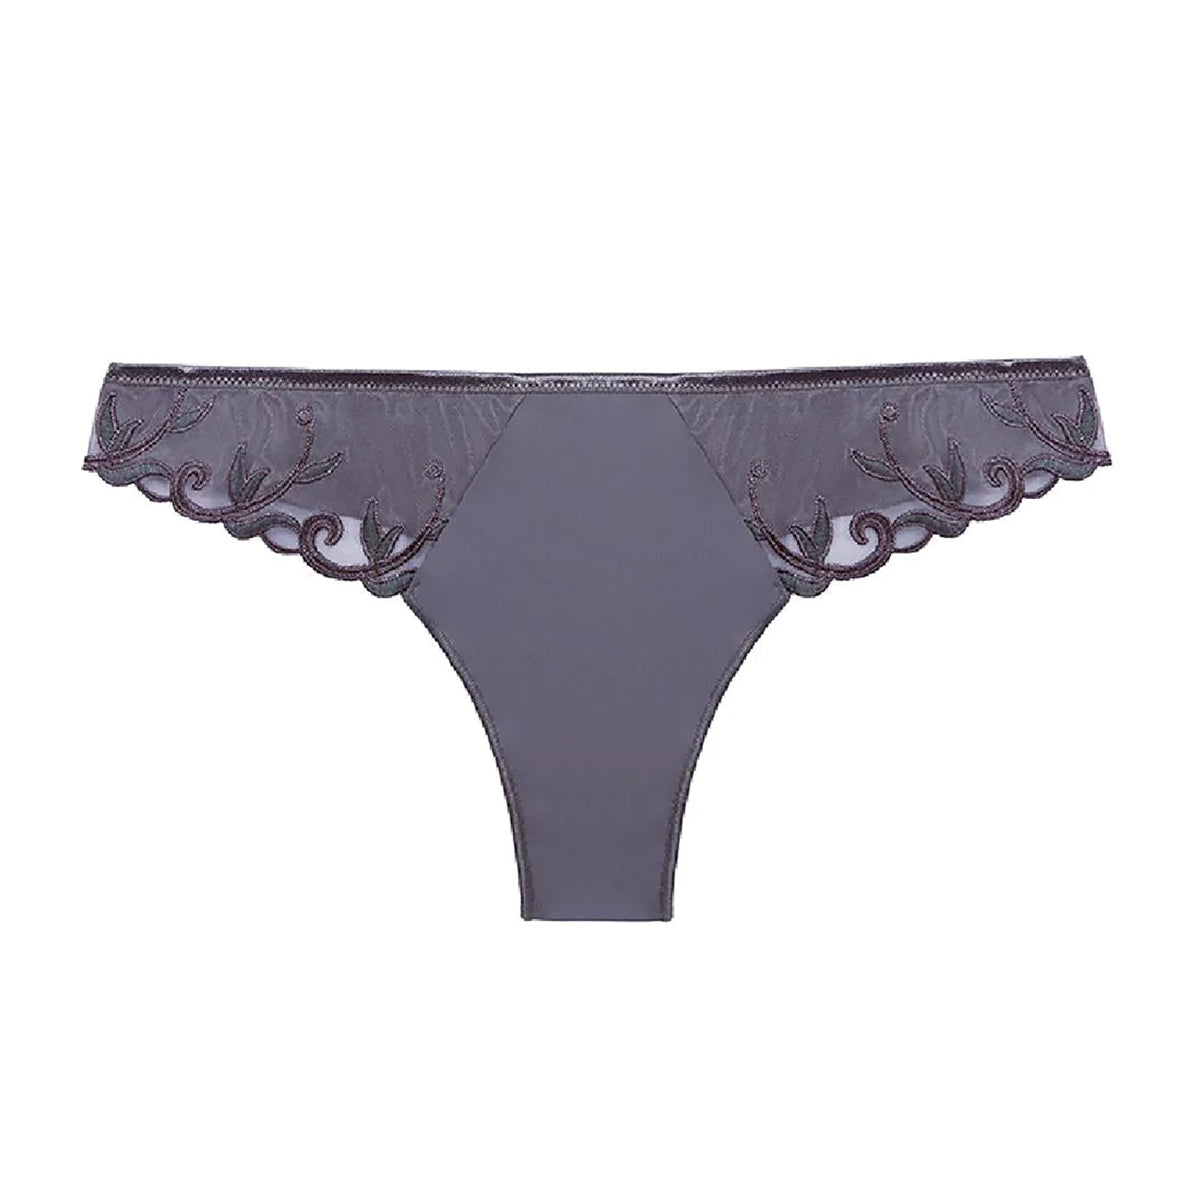 Sexy Lace Thong With Bow Seamless Hollow Out Cheeky Underwear For Women  From Sexbaby888, $1.58